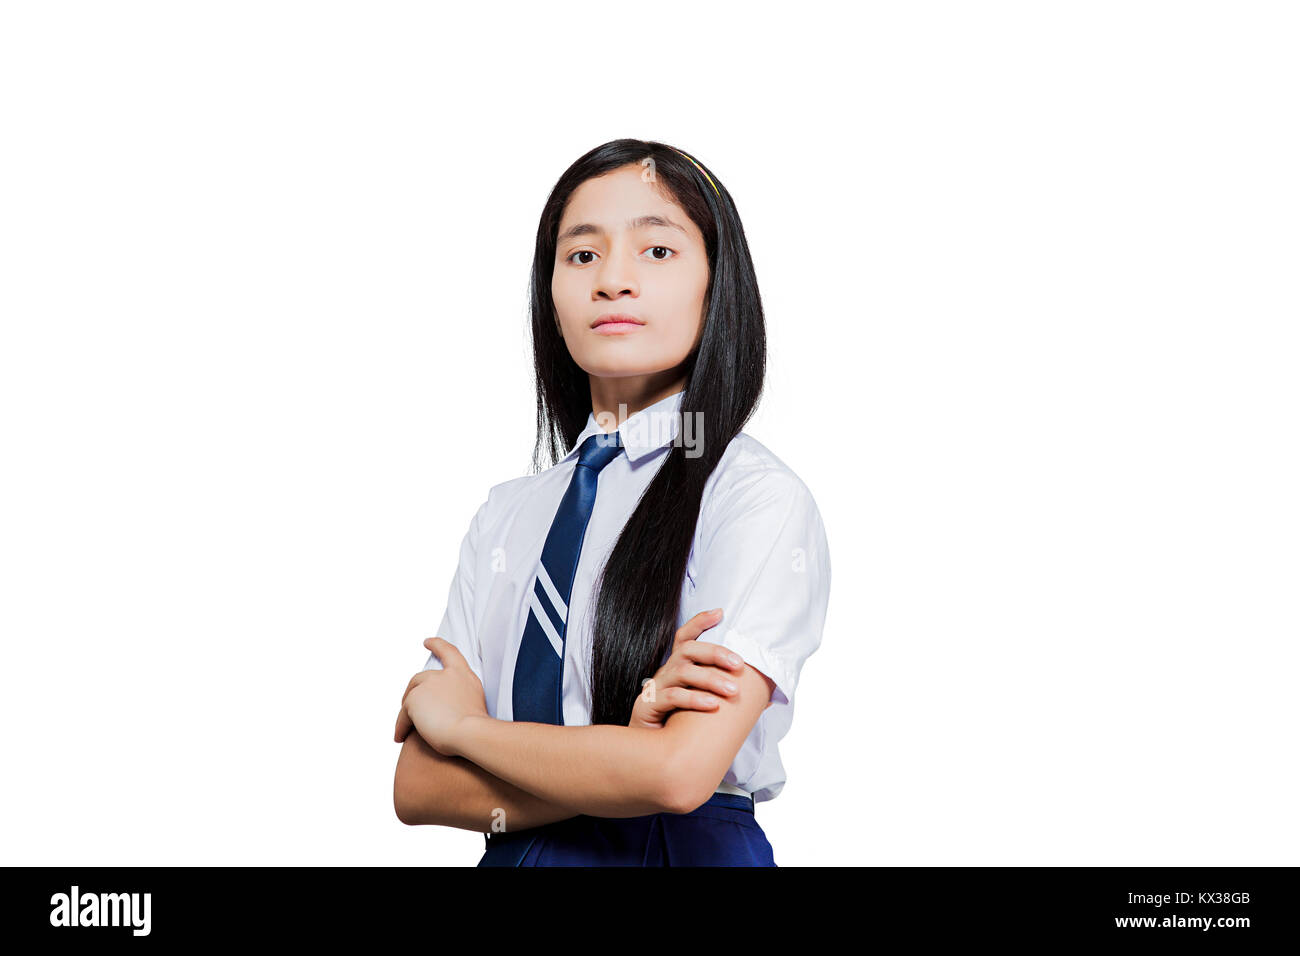 Attitude 1 Indian Young Girl School Student Arms Crossed Standing Stock  Photo - Alamy